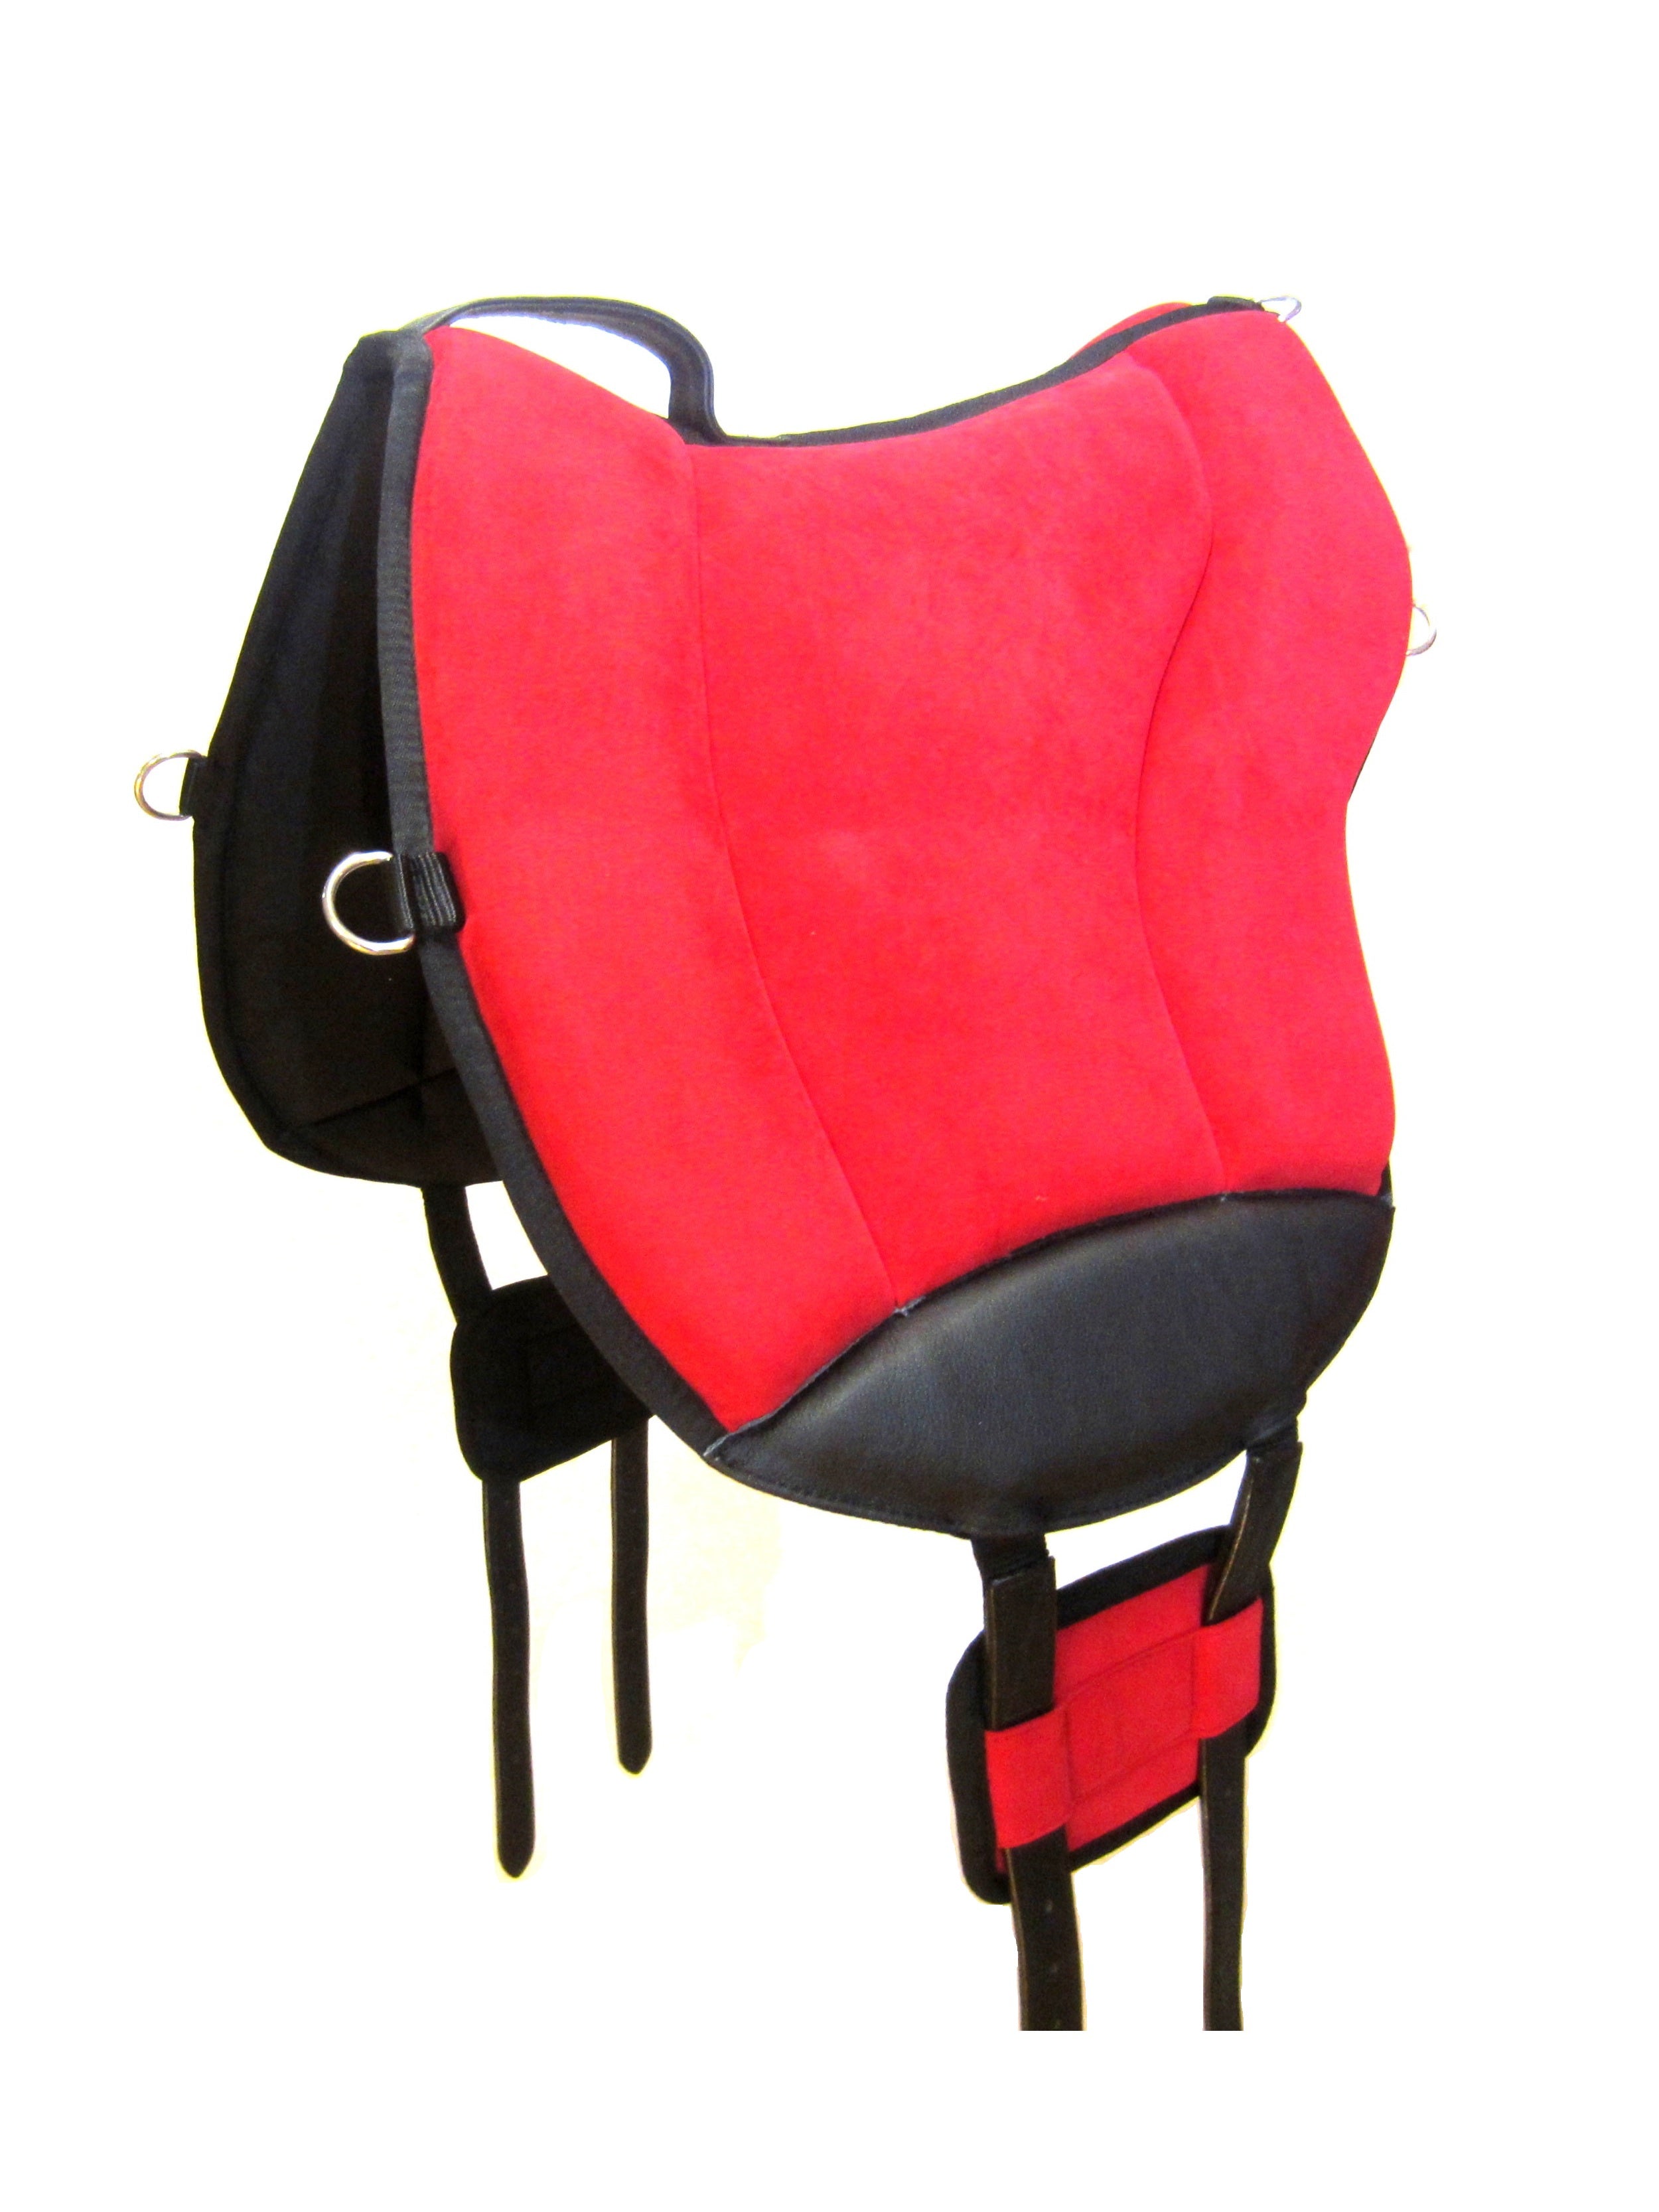 Riding pad "ALIVIO" with WBS channel &amp; chamber structure with fillable felt cushions - velcro-